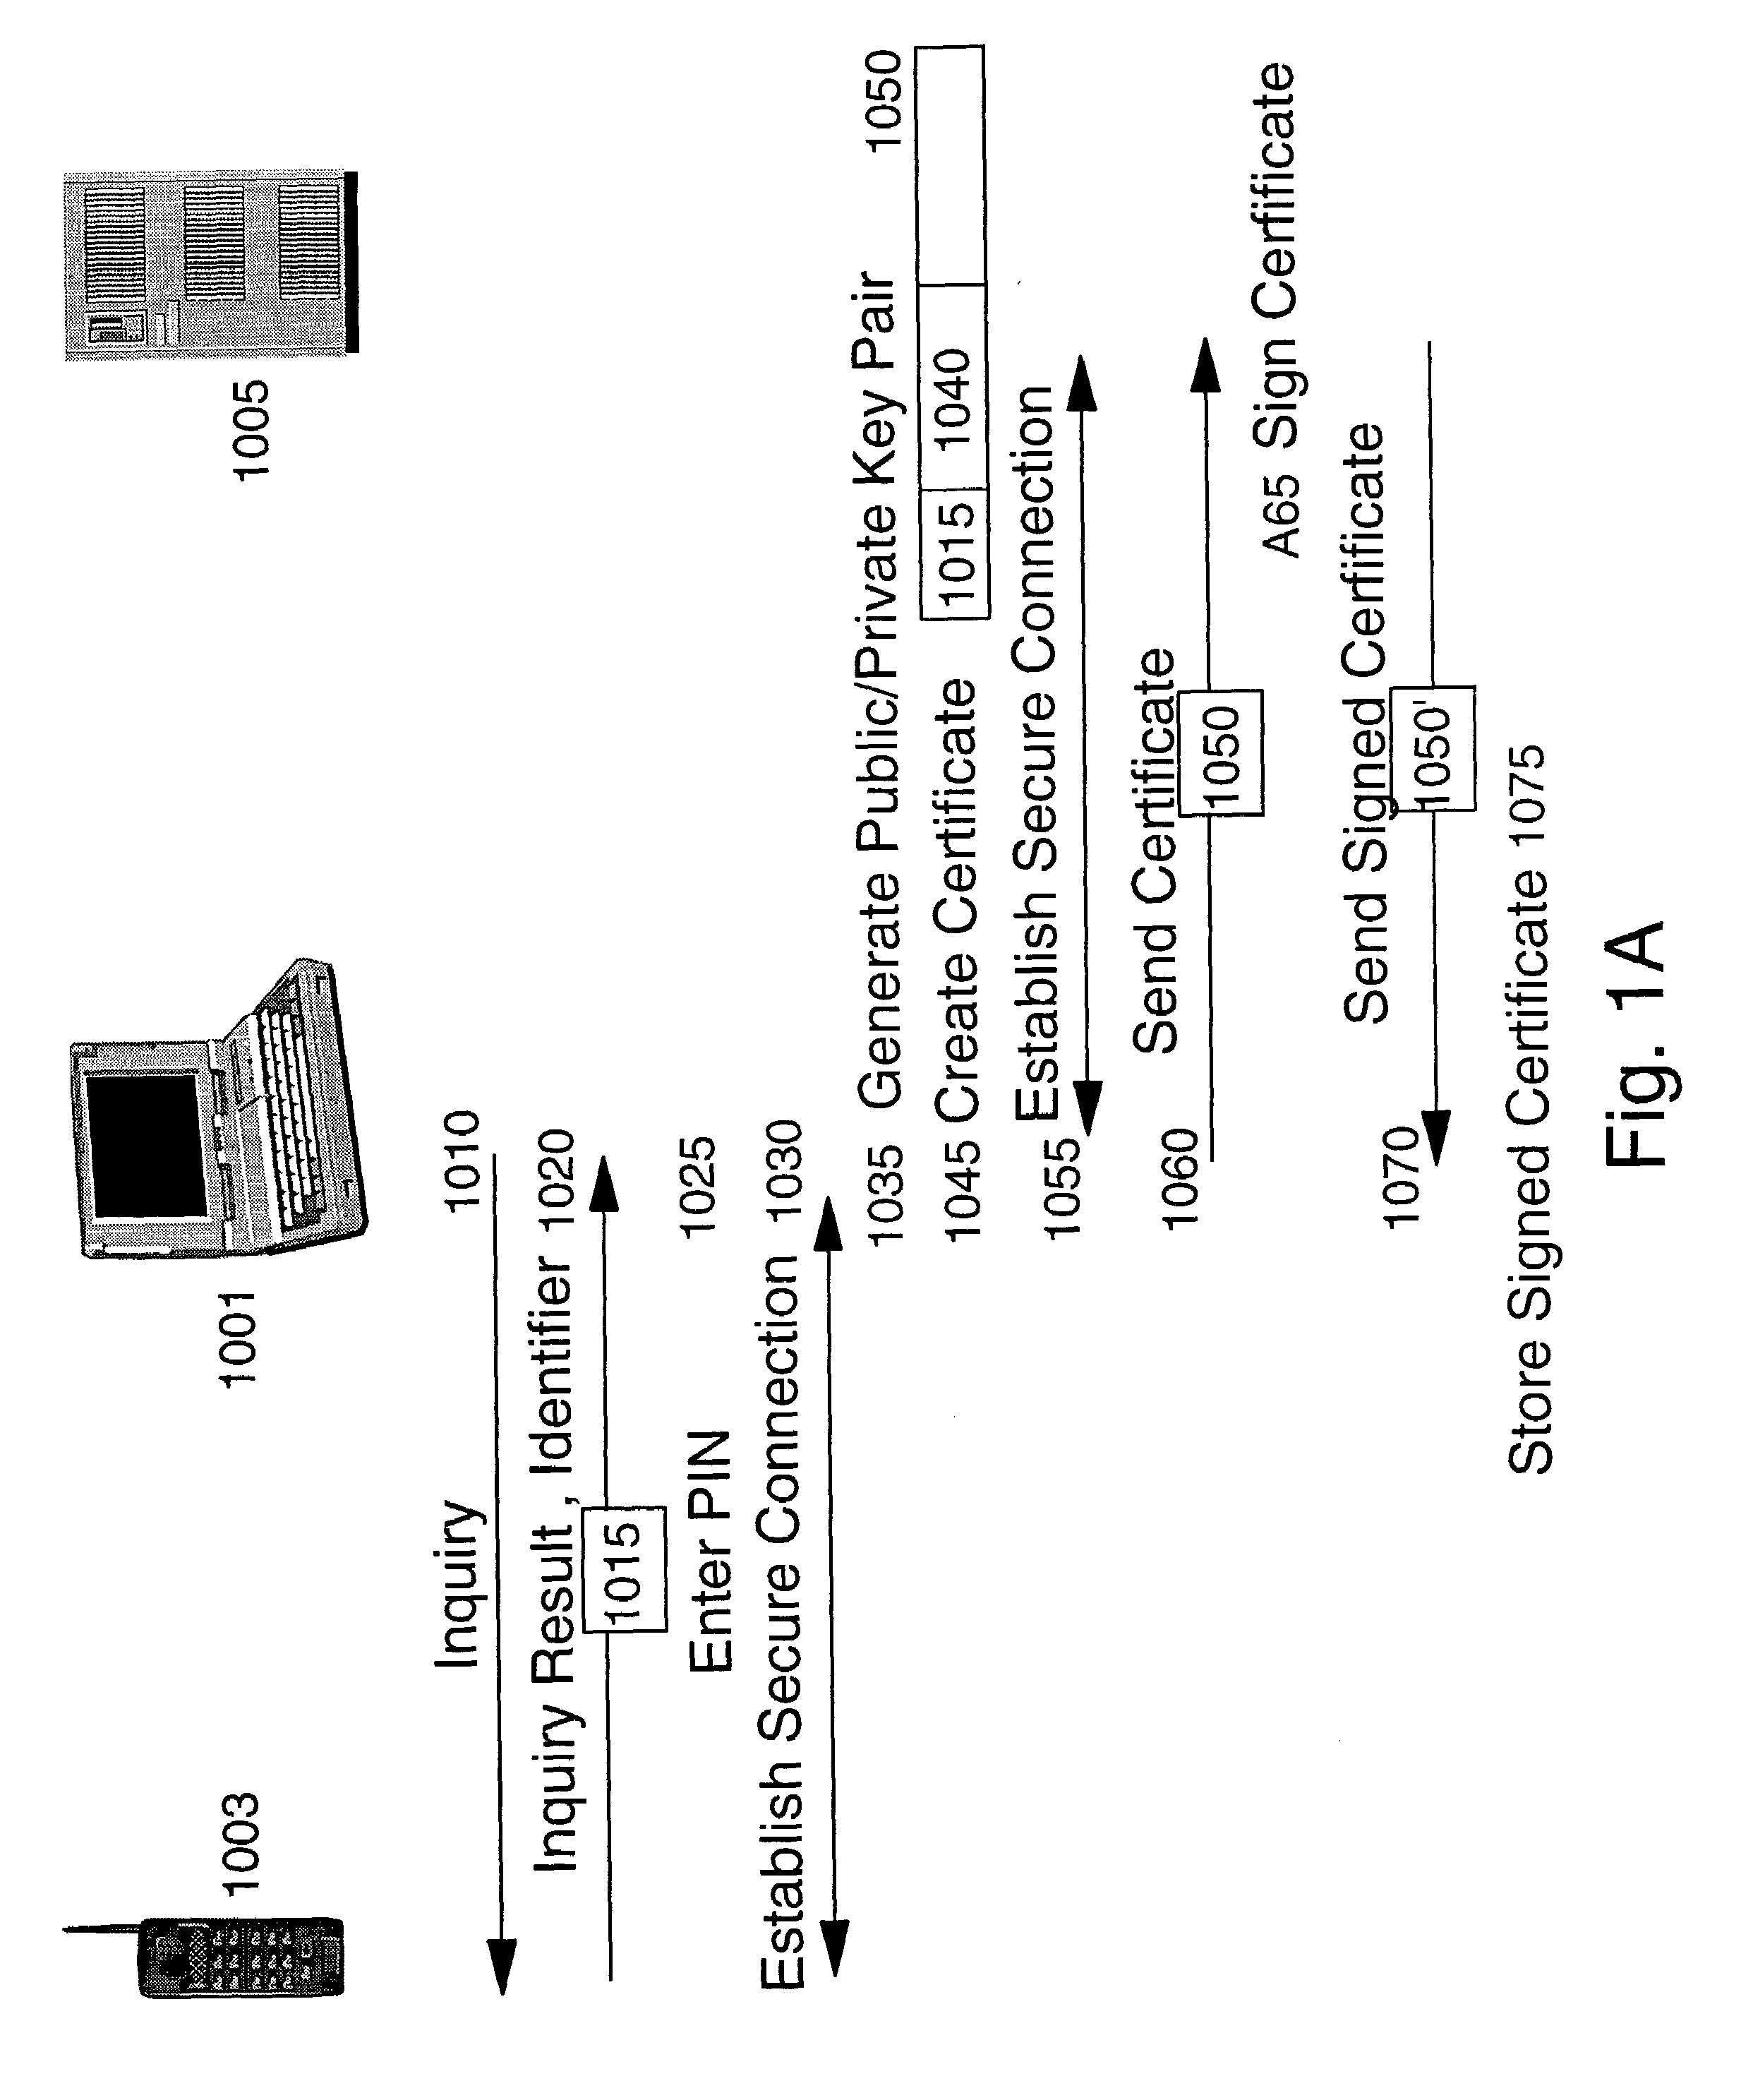 Method and apparatus for efficiently initializing mobile wireless devices